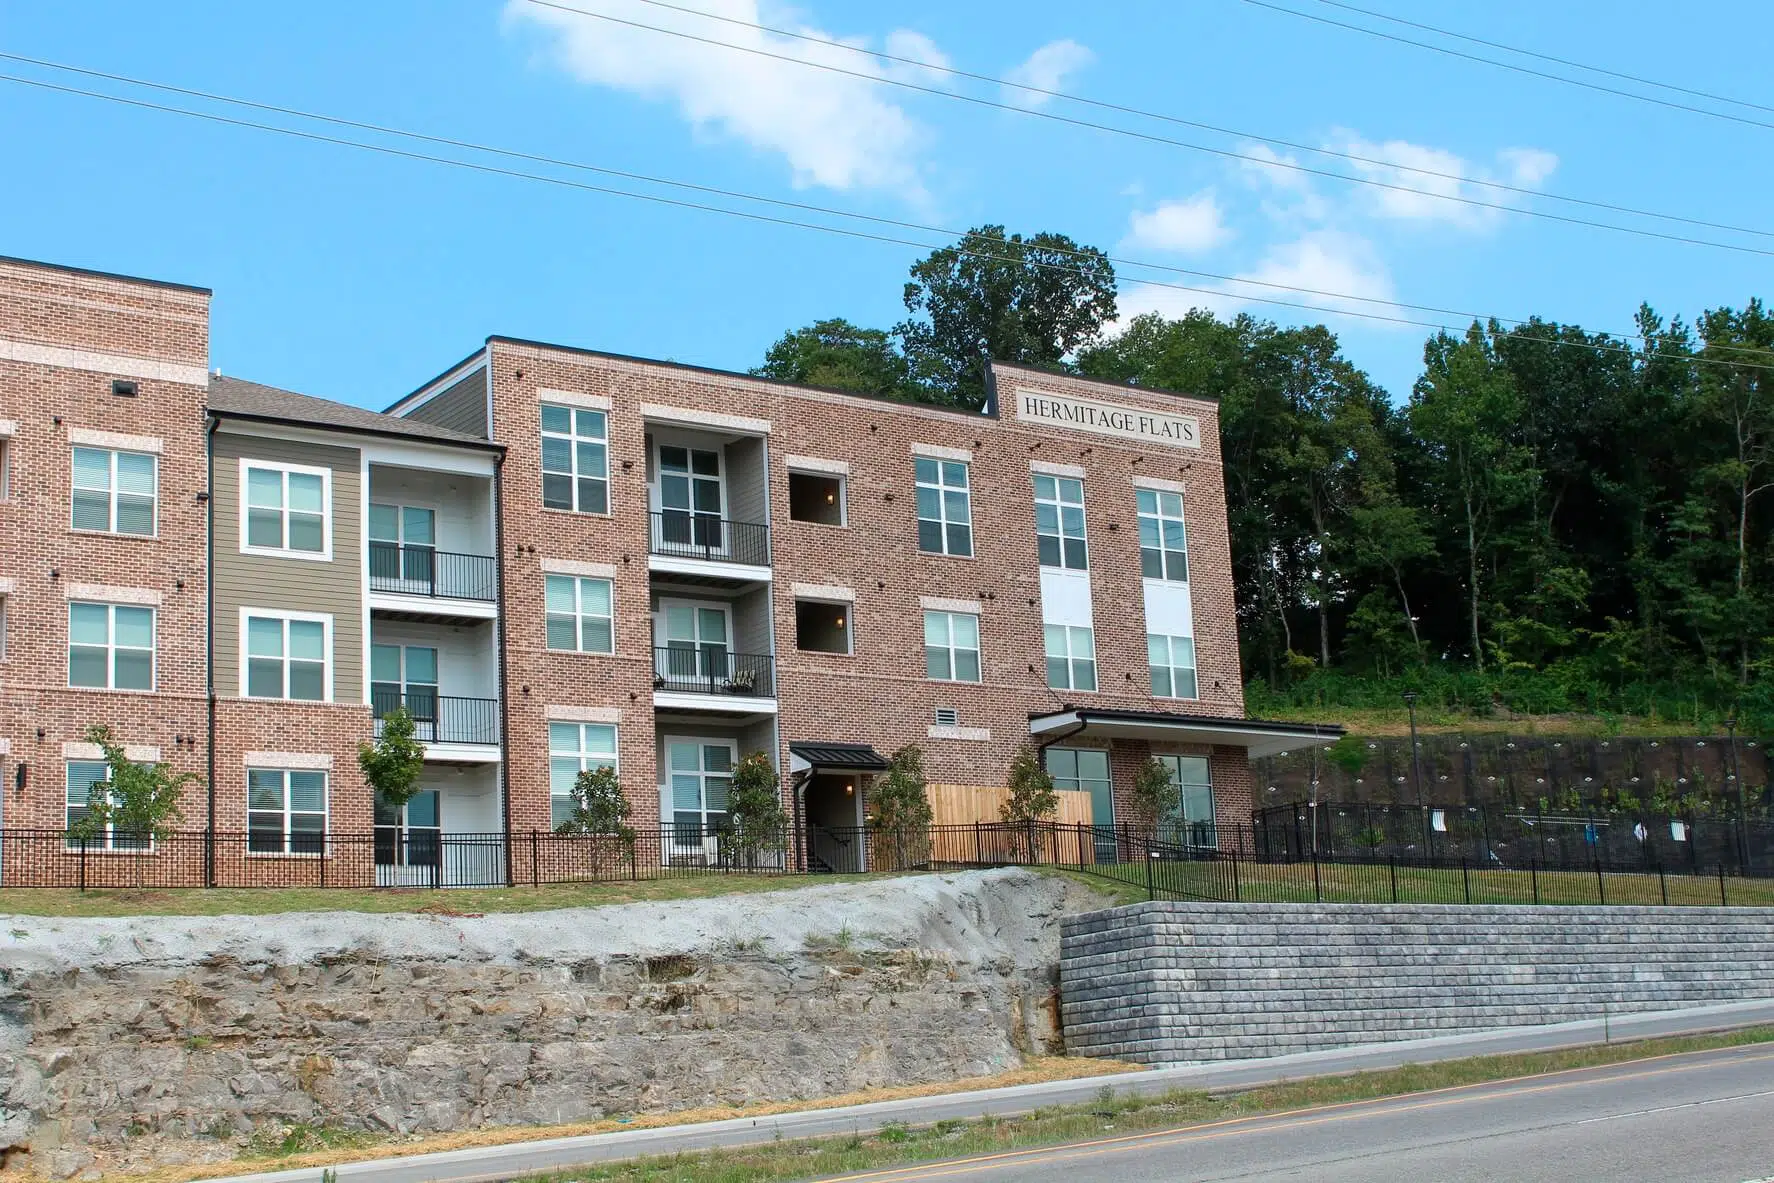 Hermitage Flats residential complex nashville tenessee